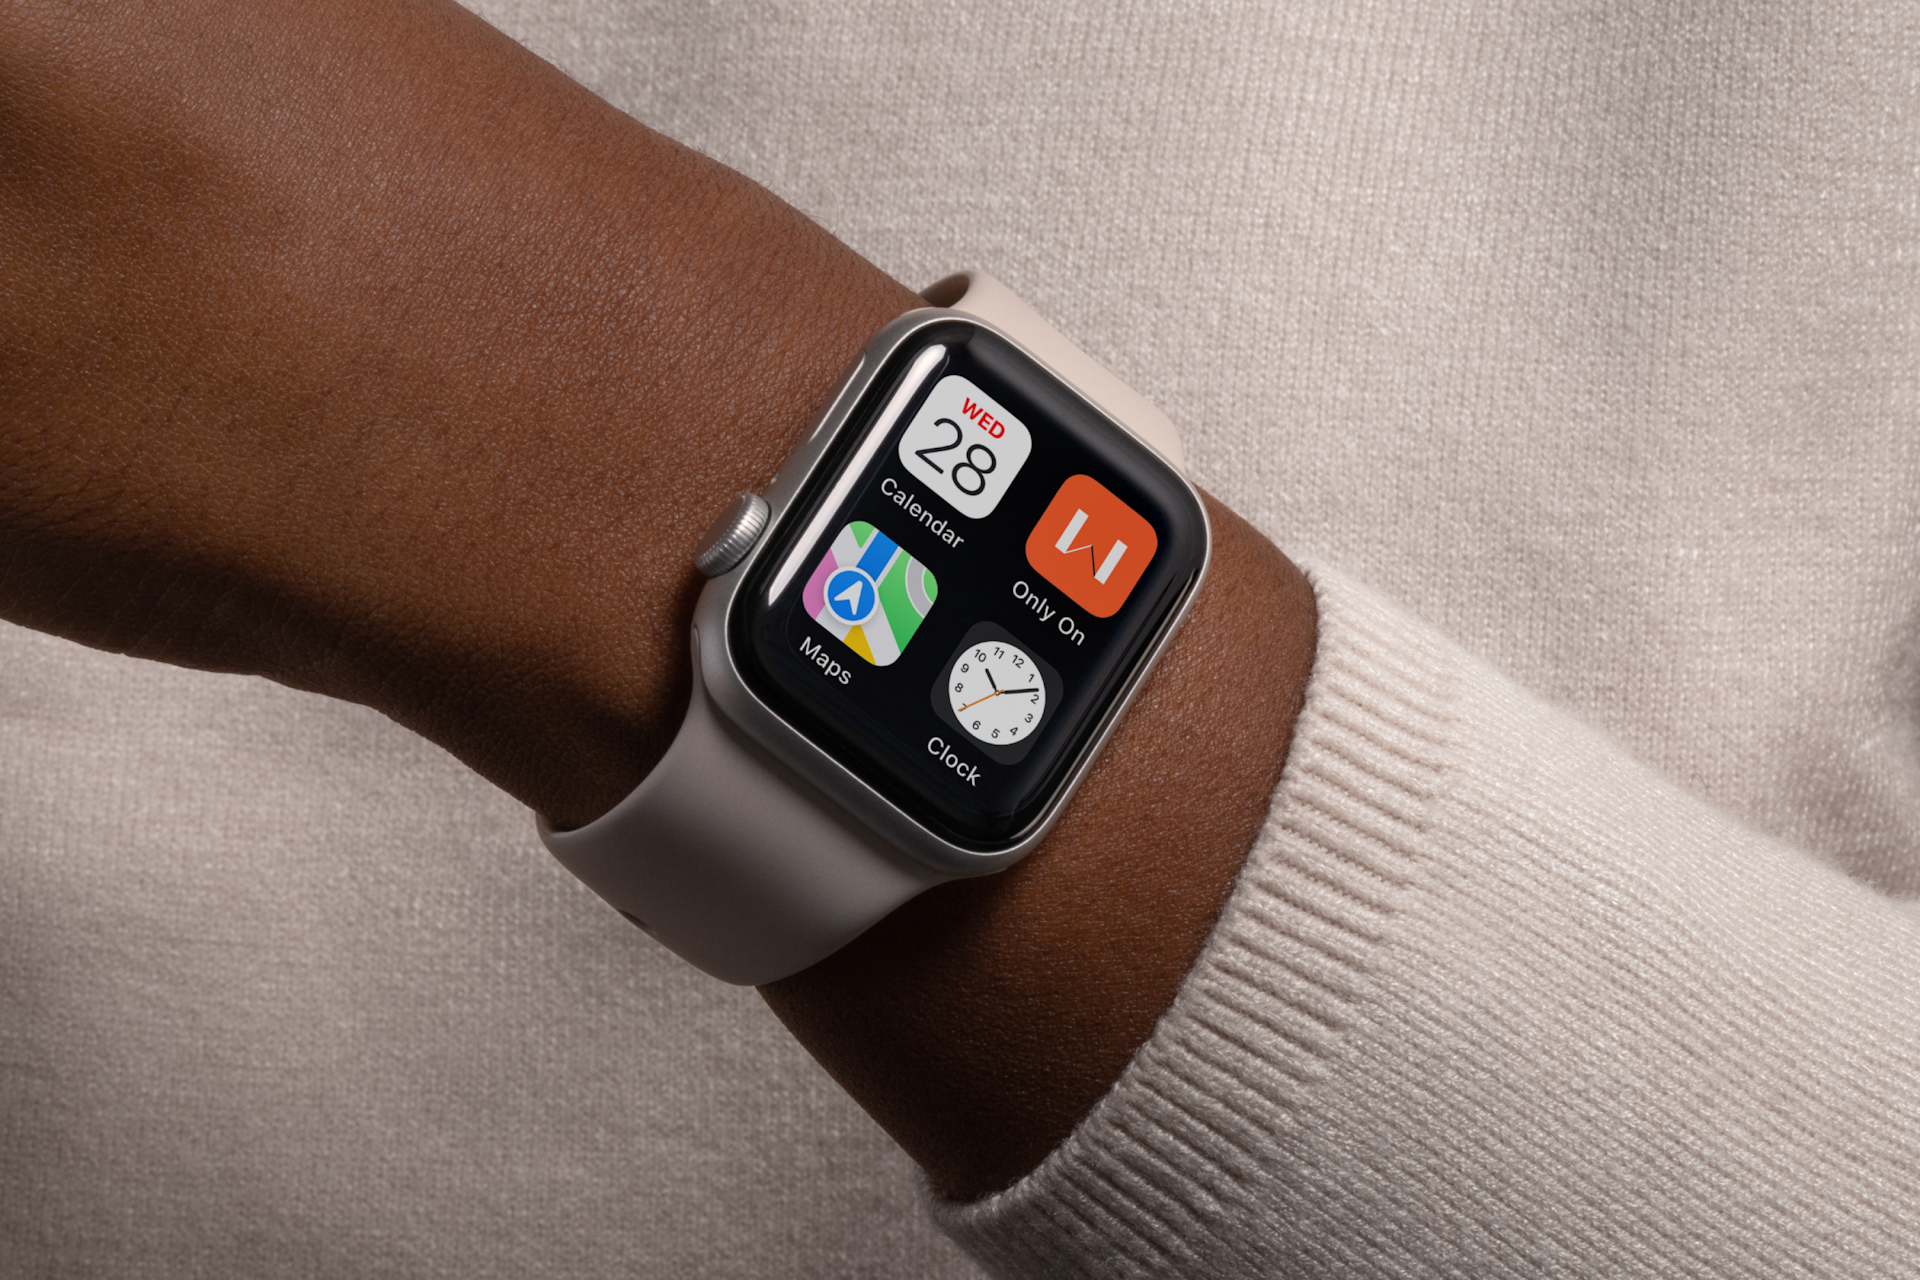 An Apple watch on a person's wrist showing the app icon for Only on Wednesdays